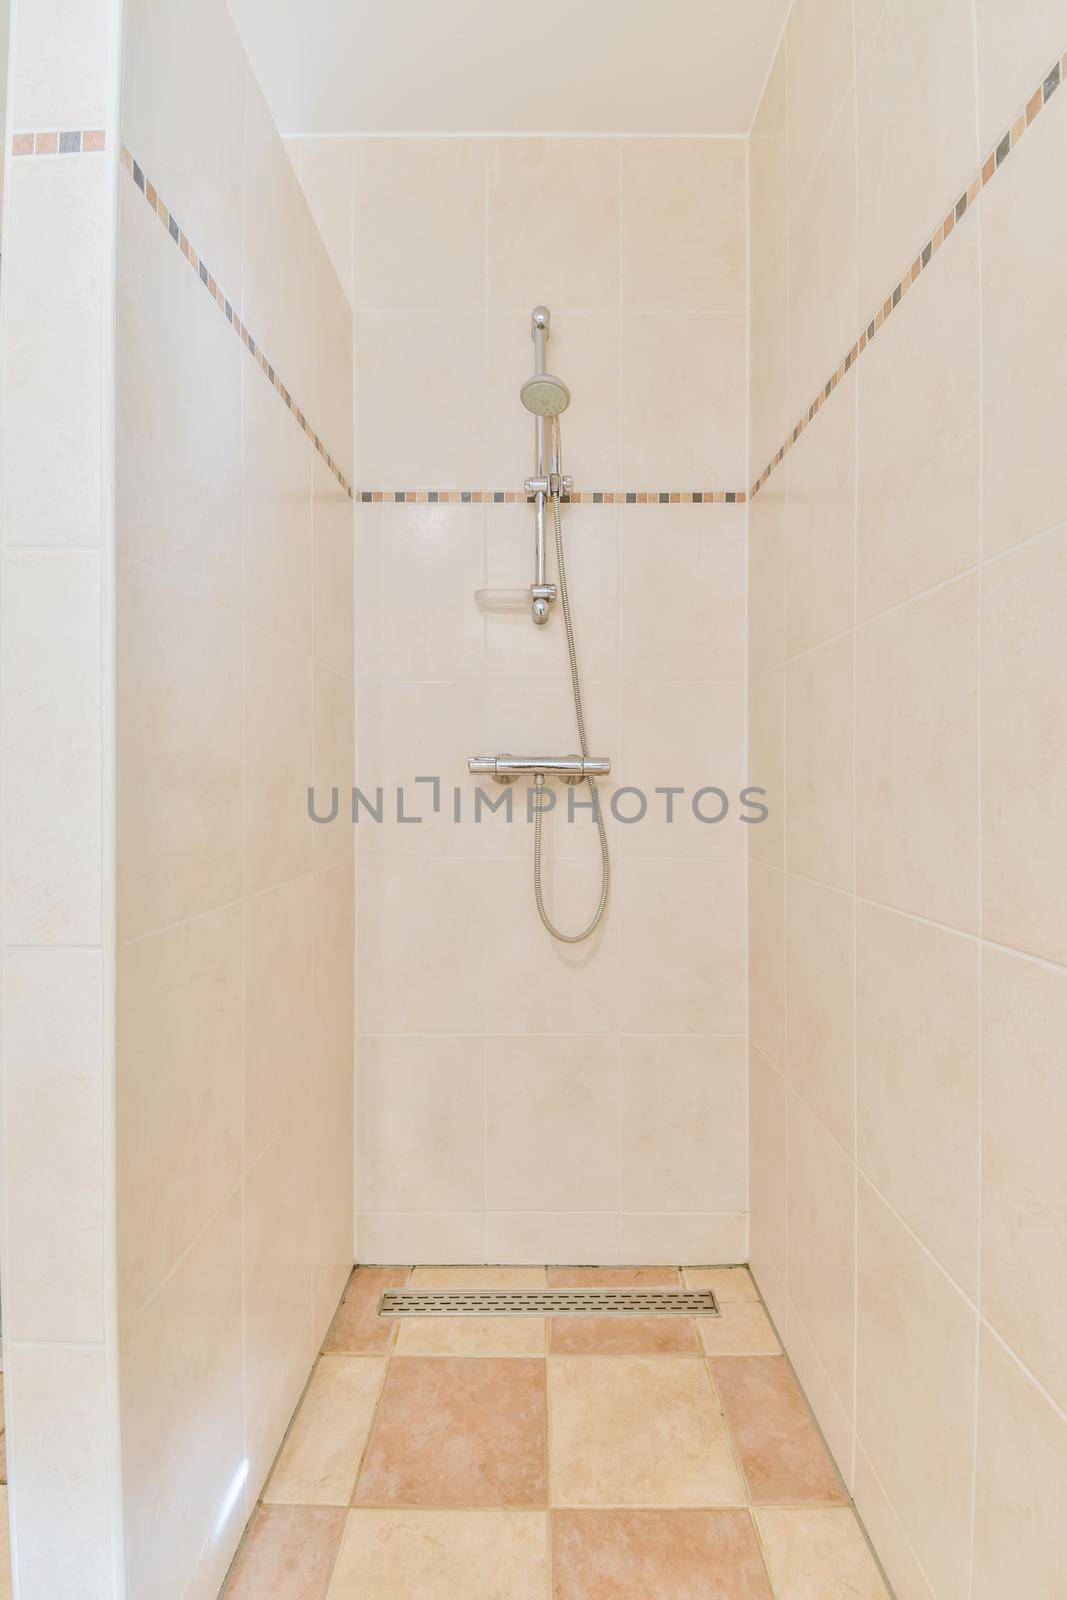 Lovely bathroom with tiled floor and walk-in shower